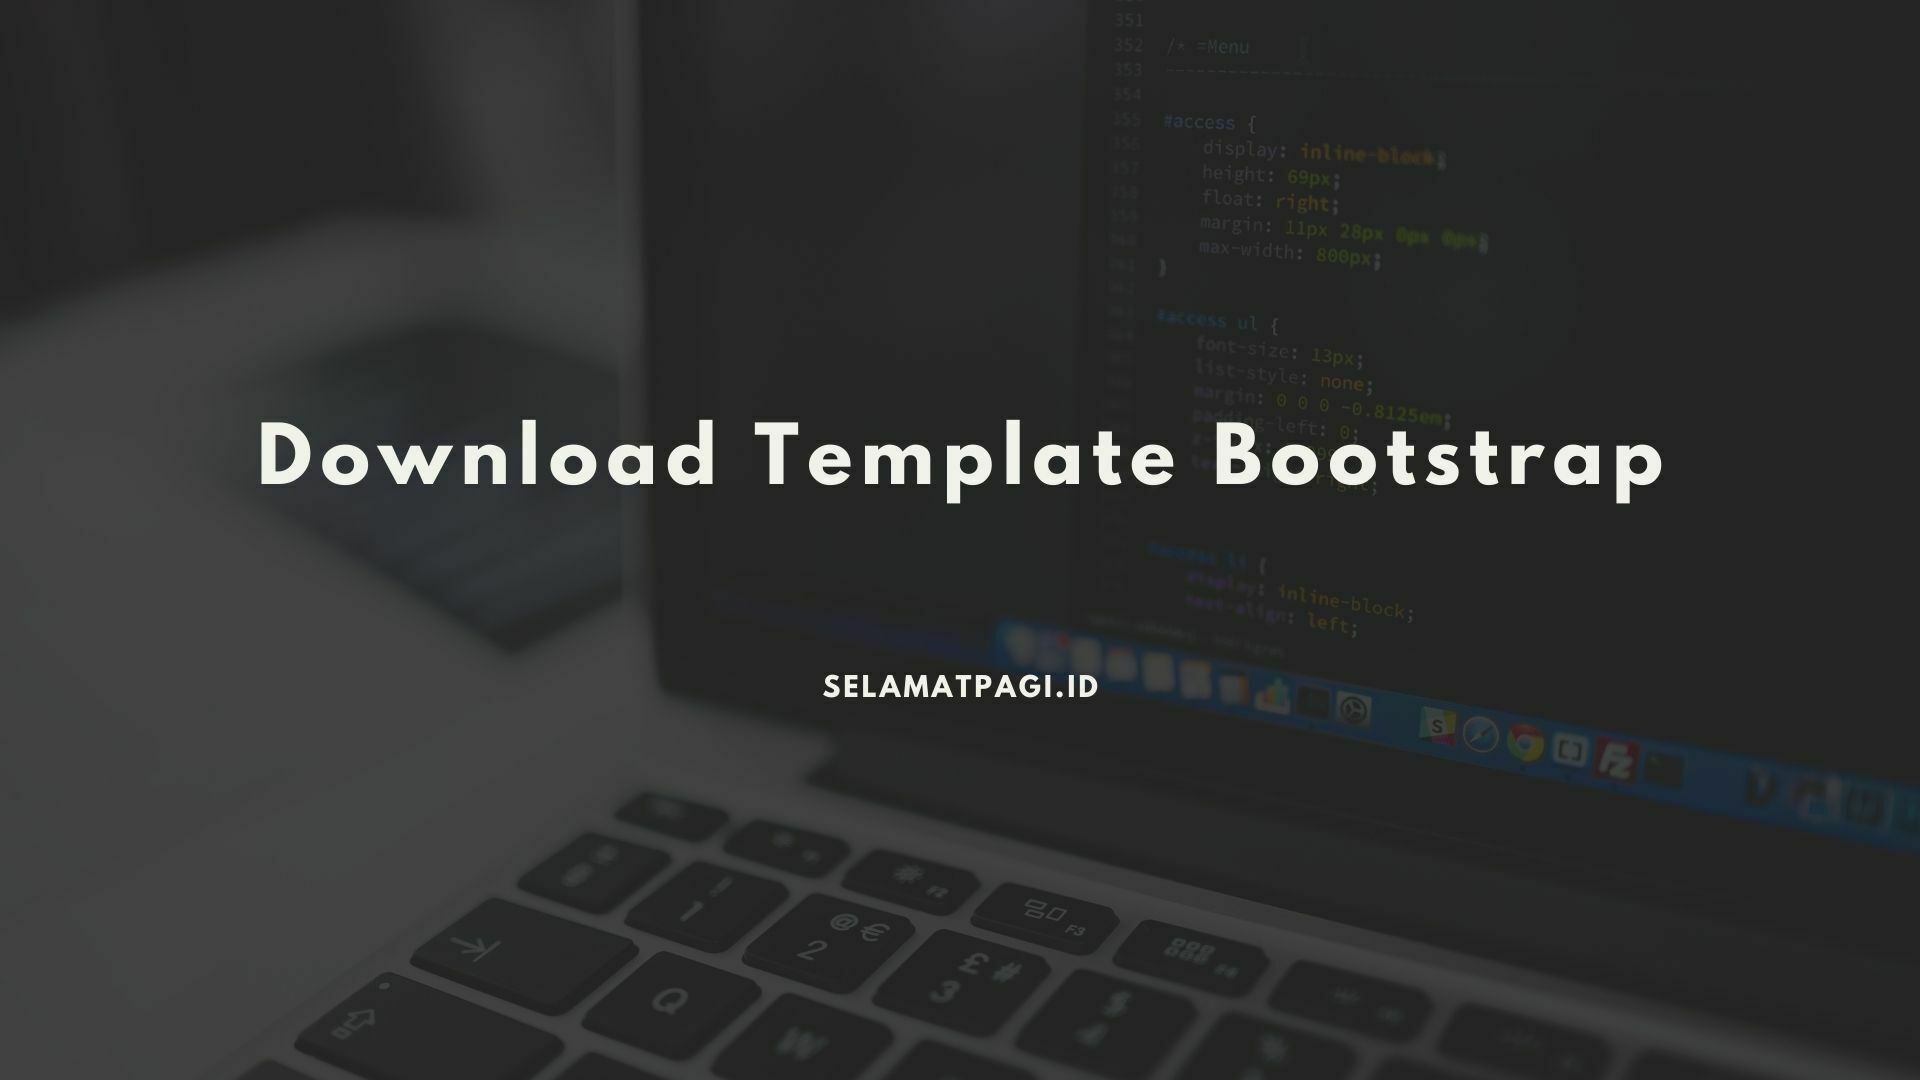 Download Template Bootstrap